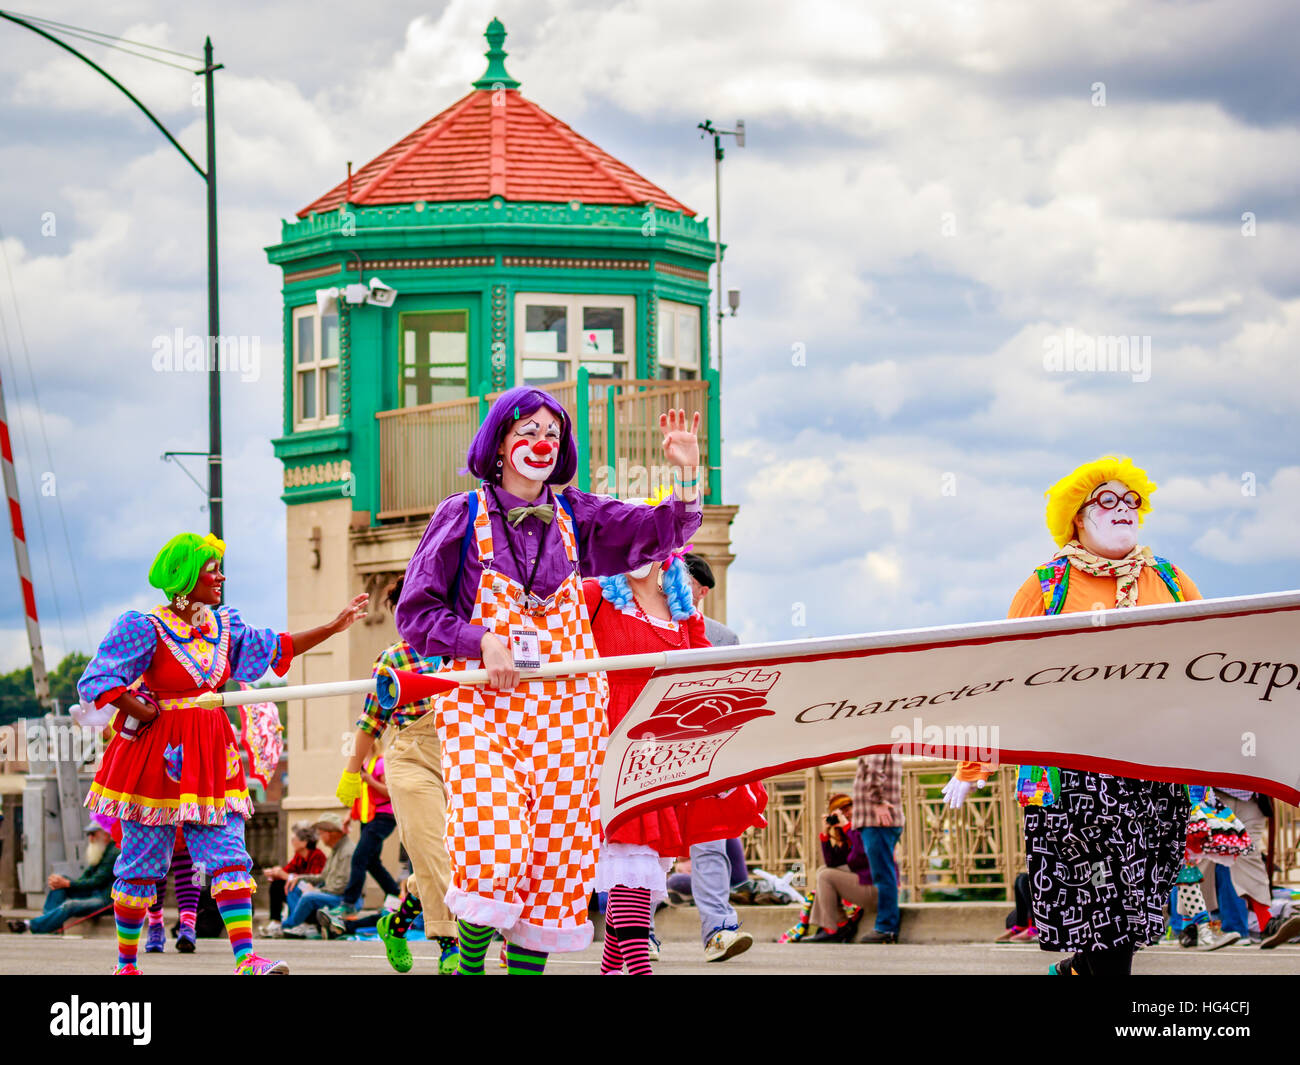 Portland, Oregon, USA - June 11, 2016: Character Clown Corps in the Grand Floral Parade during Portland Rose Festival 2016. Stock Photo